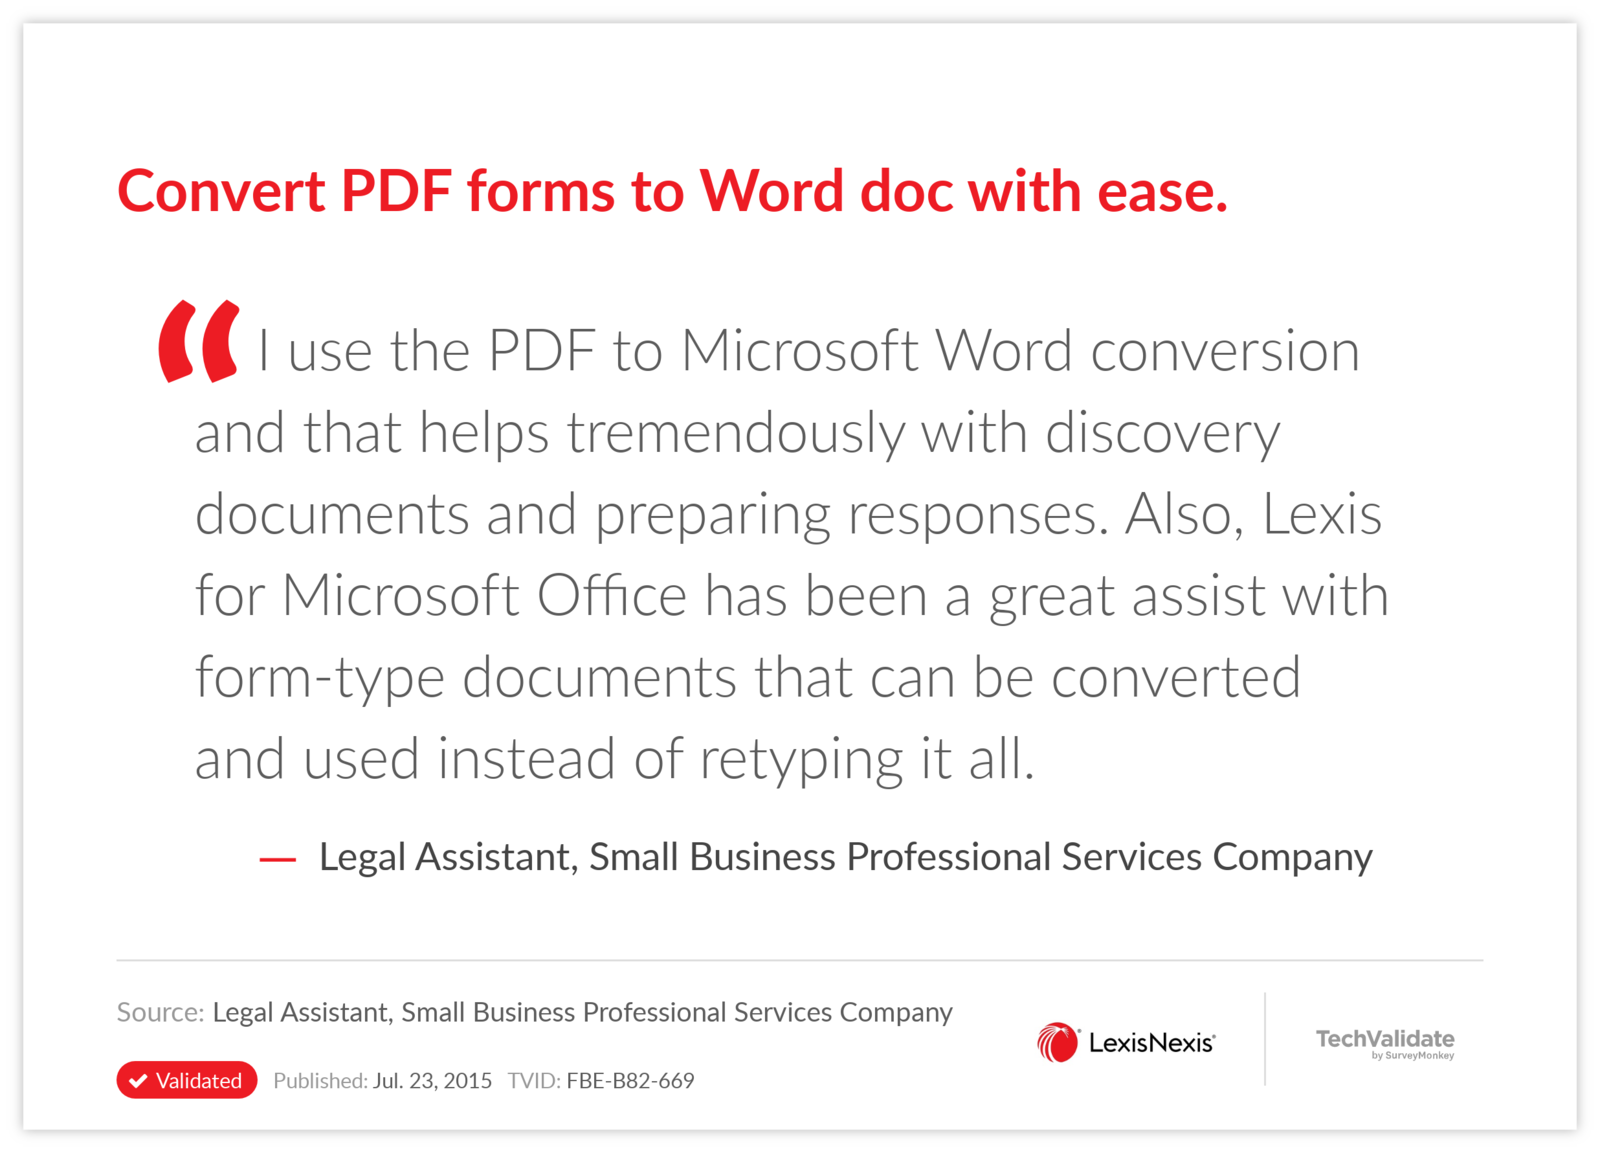 Convert PDF forms to Word doc with ease.